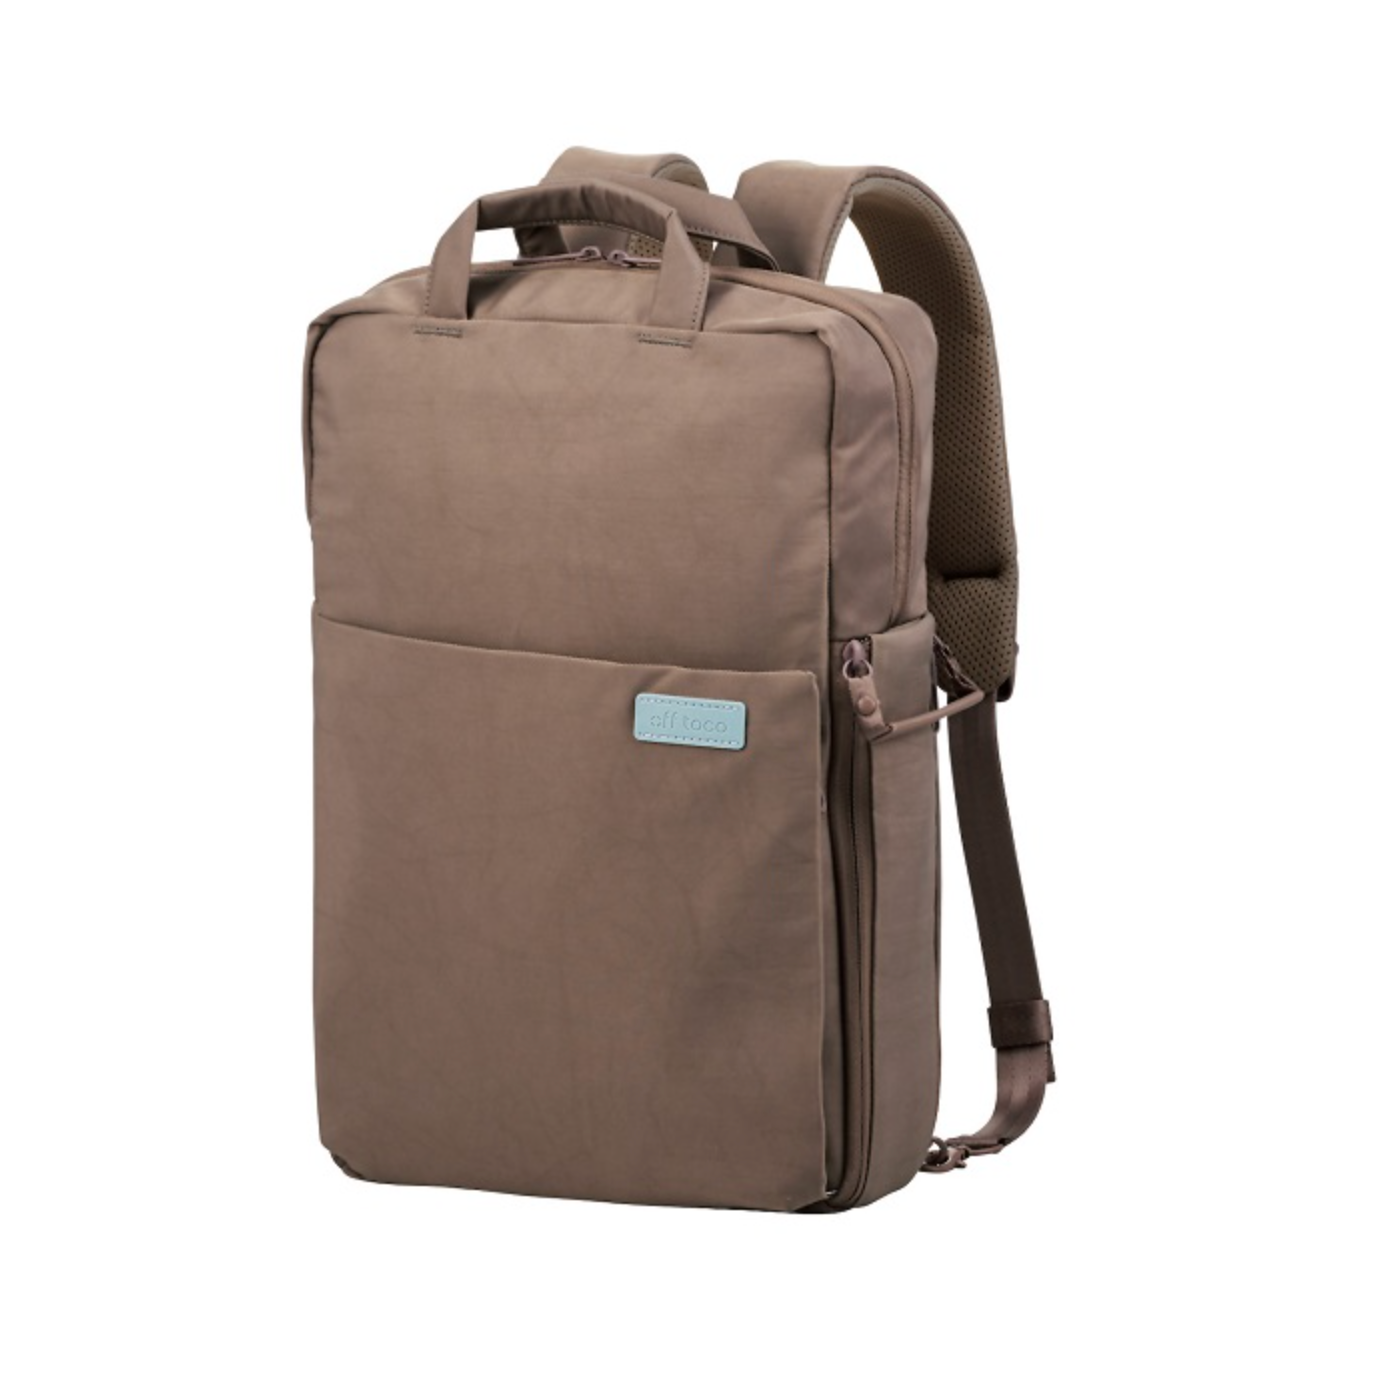 ELECOM off-toco canvas backpack OF-04 (7 colors)